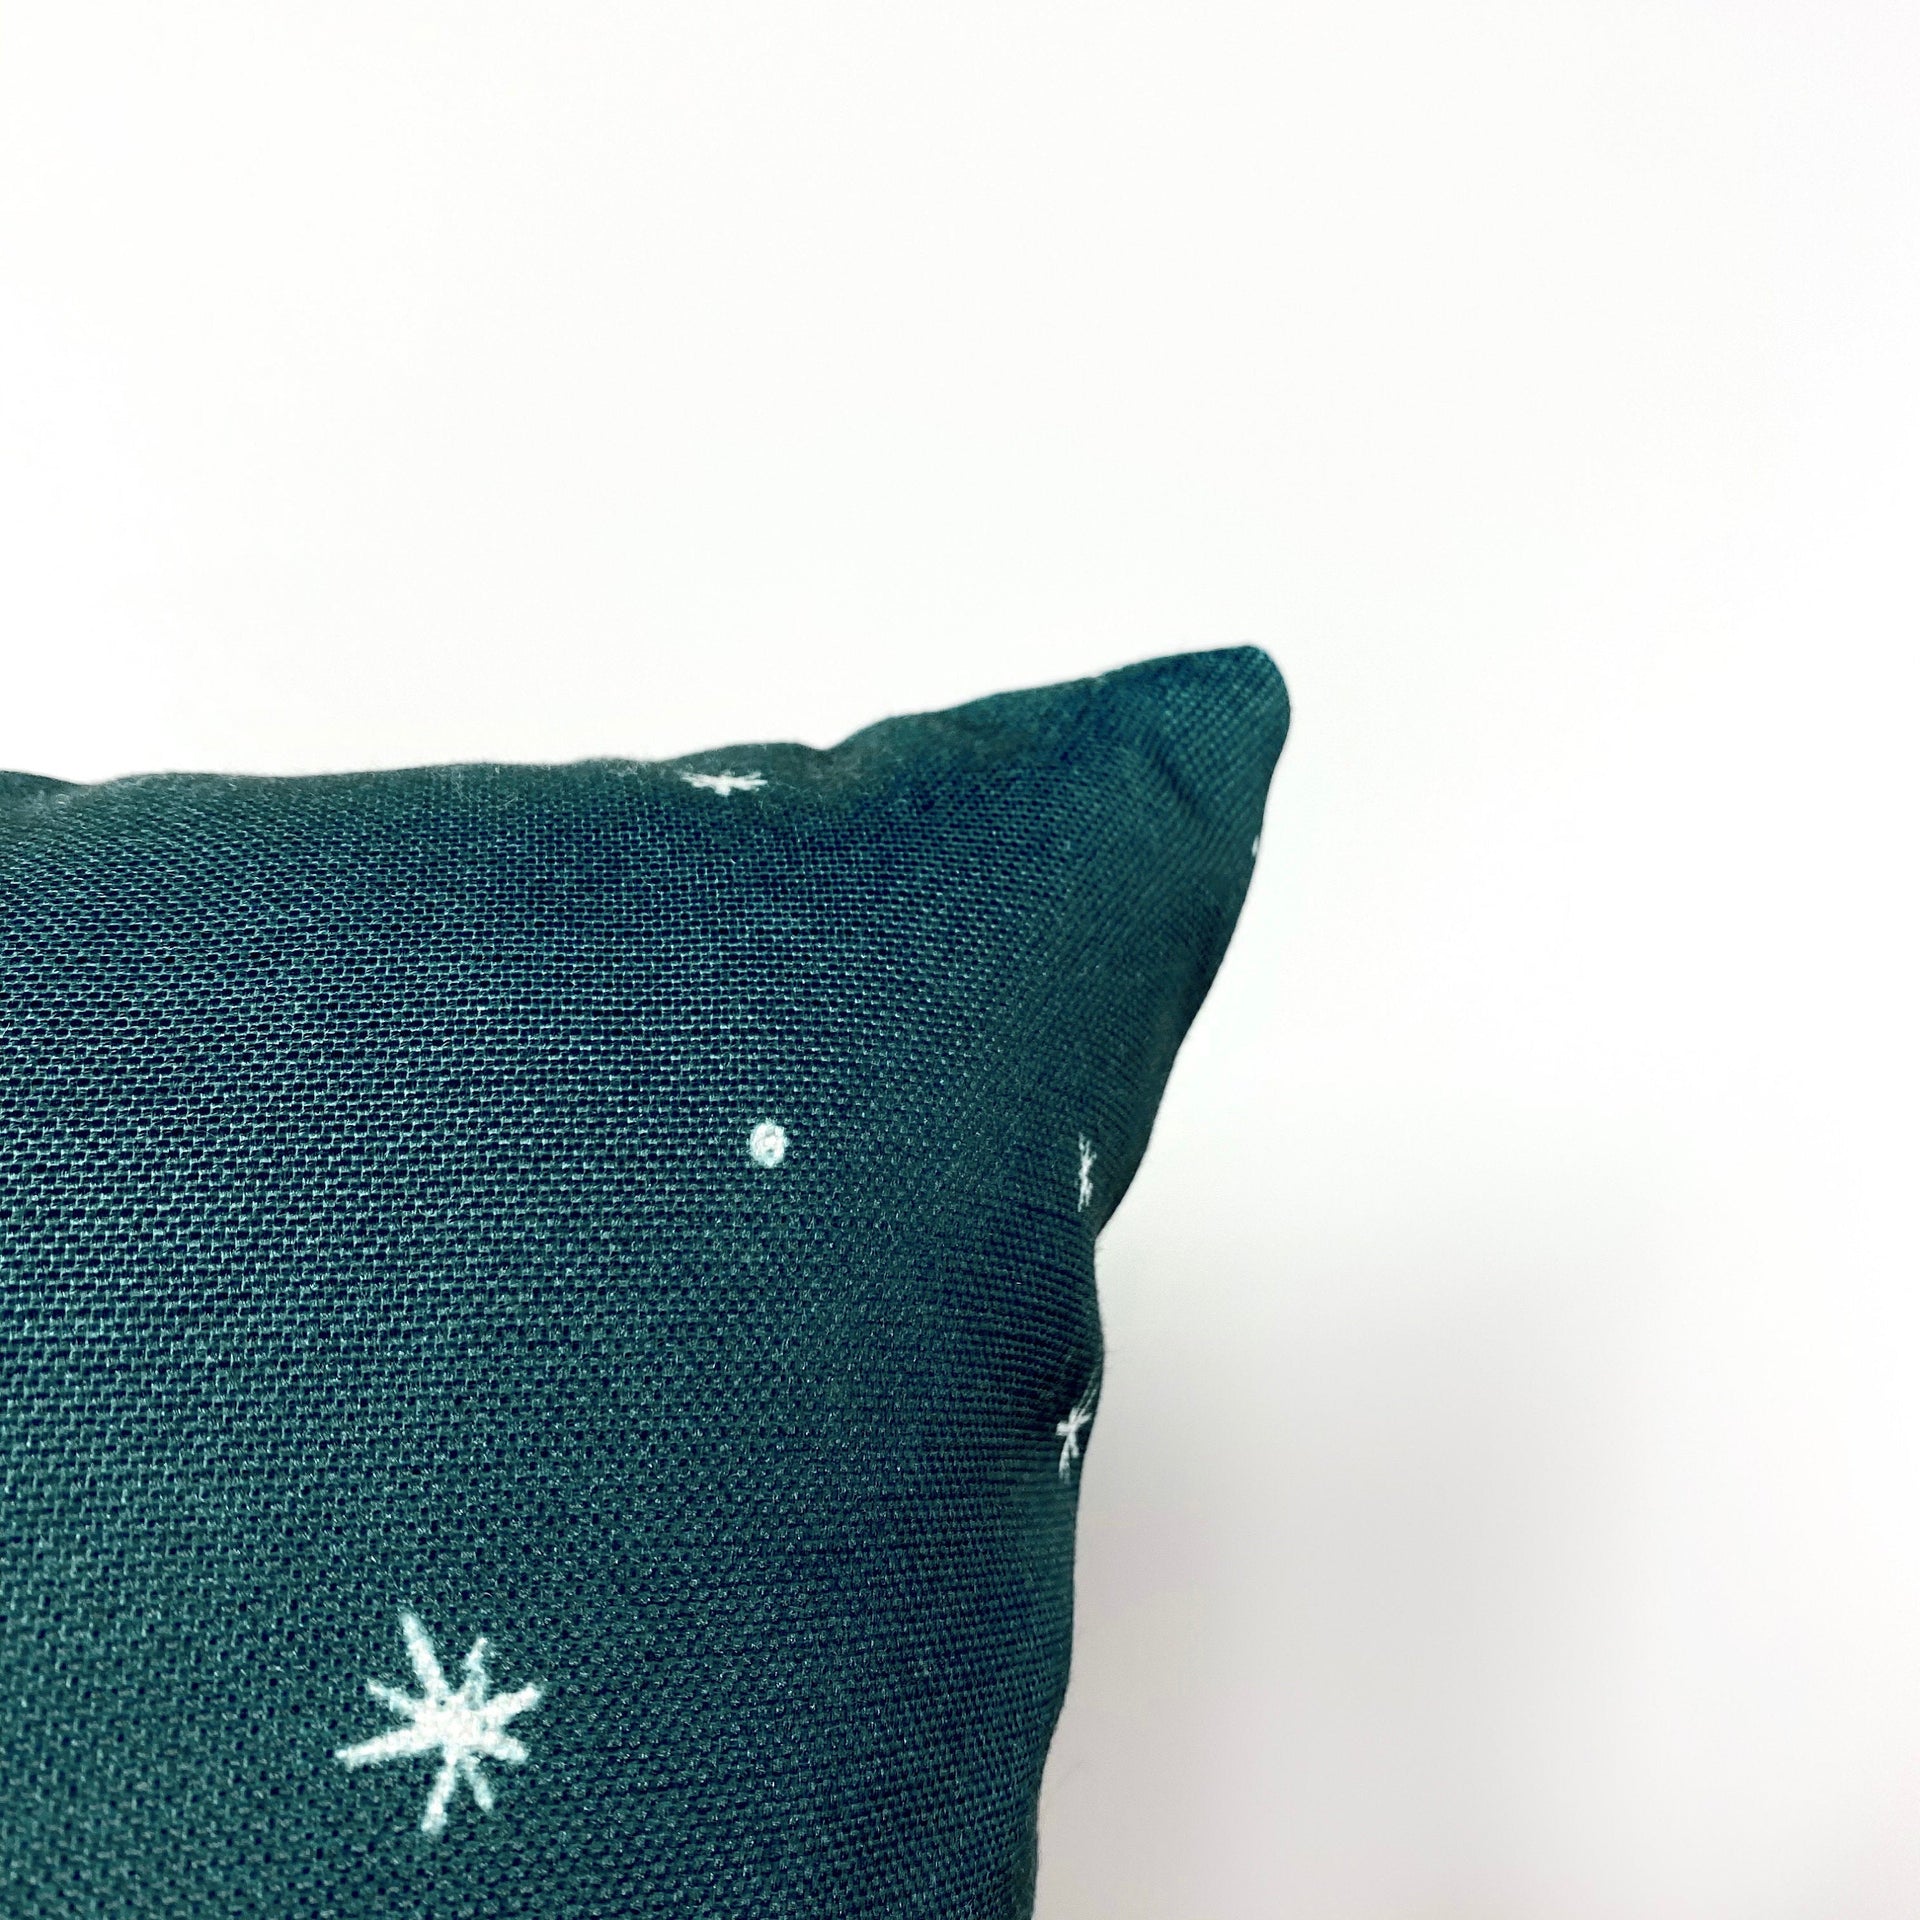 Green Nordic Pine Christmas Tree | Pillow Cover | Personalized Gift | - Mercantile Mountain